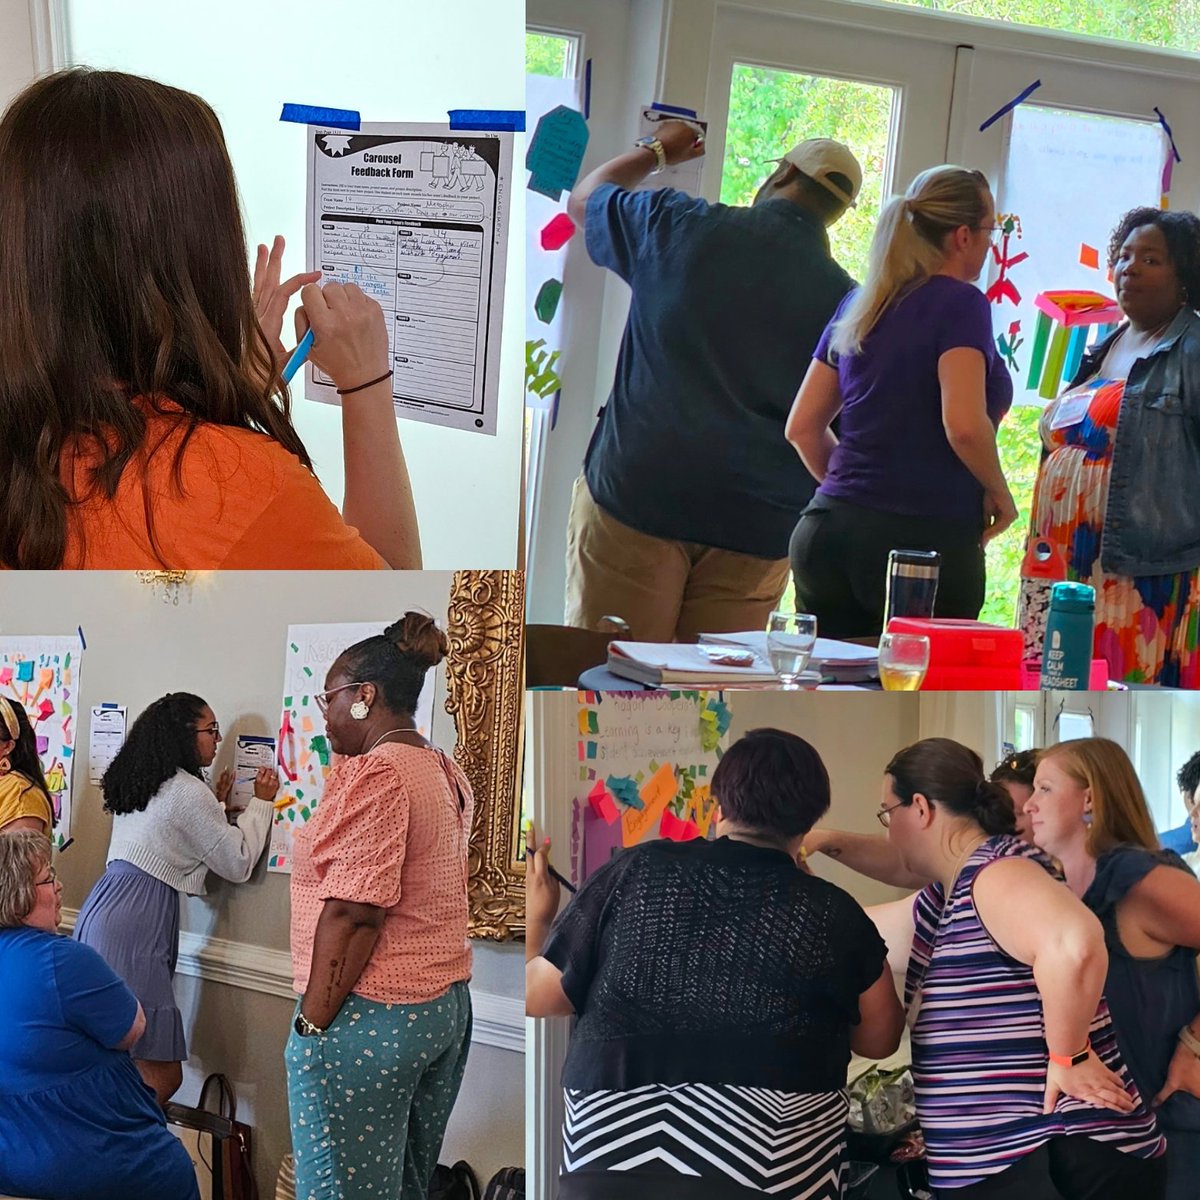 Around and around, they go! Participants engaged in the 'Carousal Feedback' Kagan Cooperative Learning Structure as a way to efficiently present and provide feedback on their team projects. @rickatkagan @KaganOnline